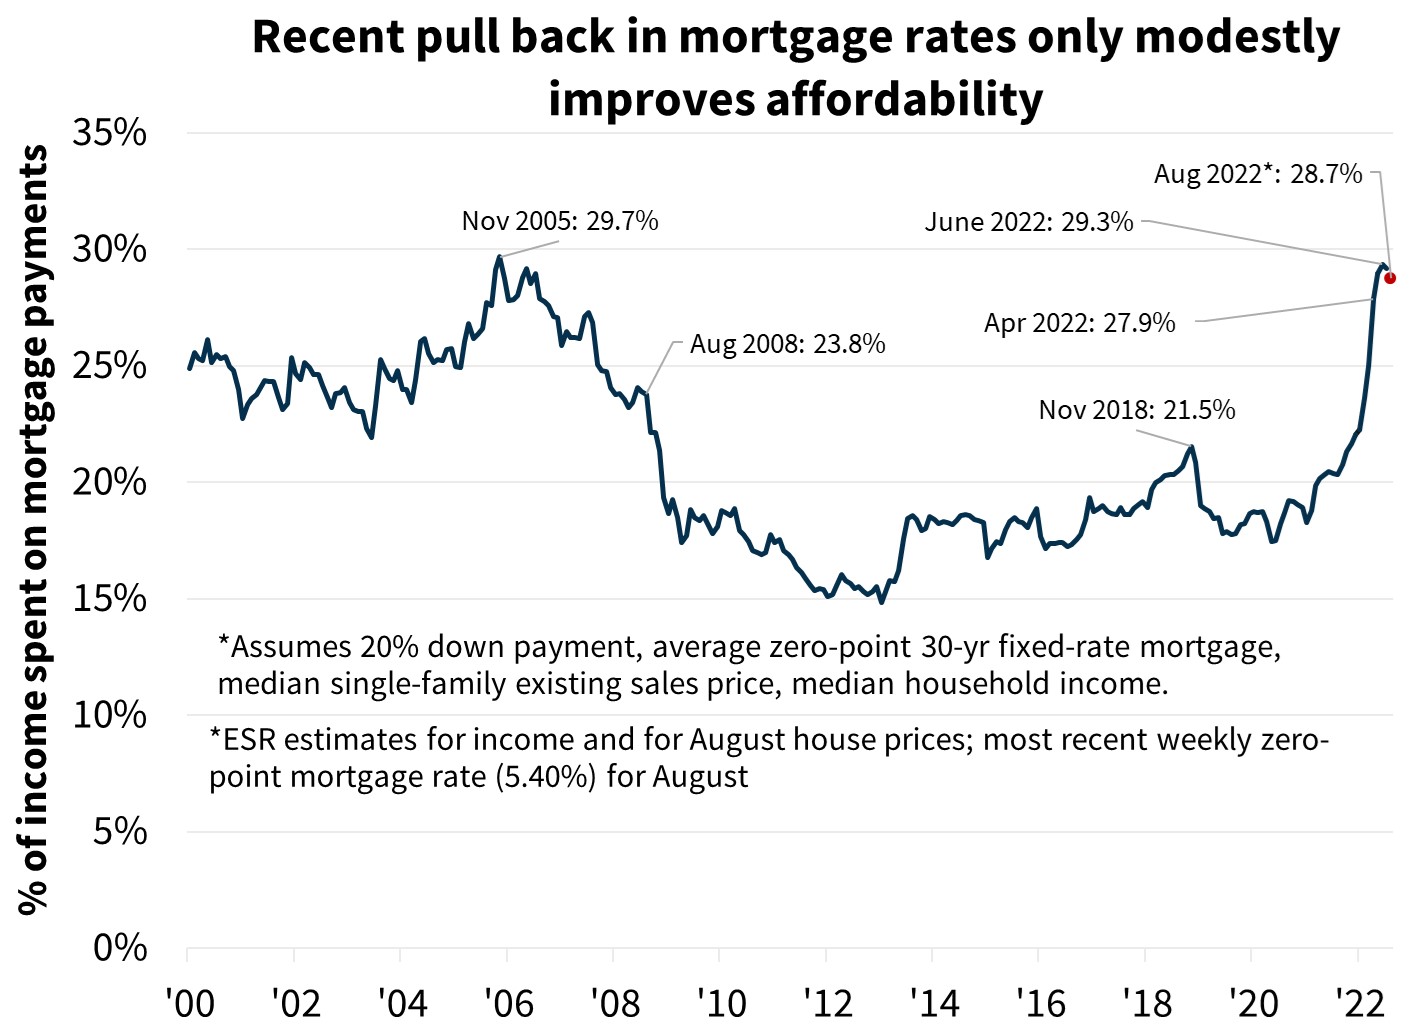  Recent pull back in mortgage rates only modestly improves affordability 